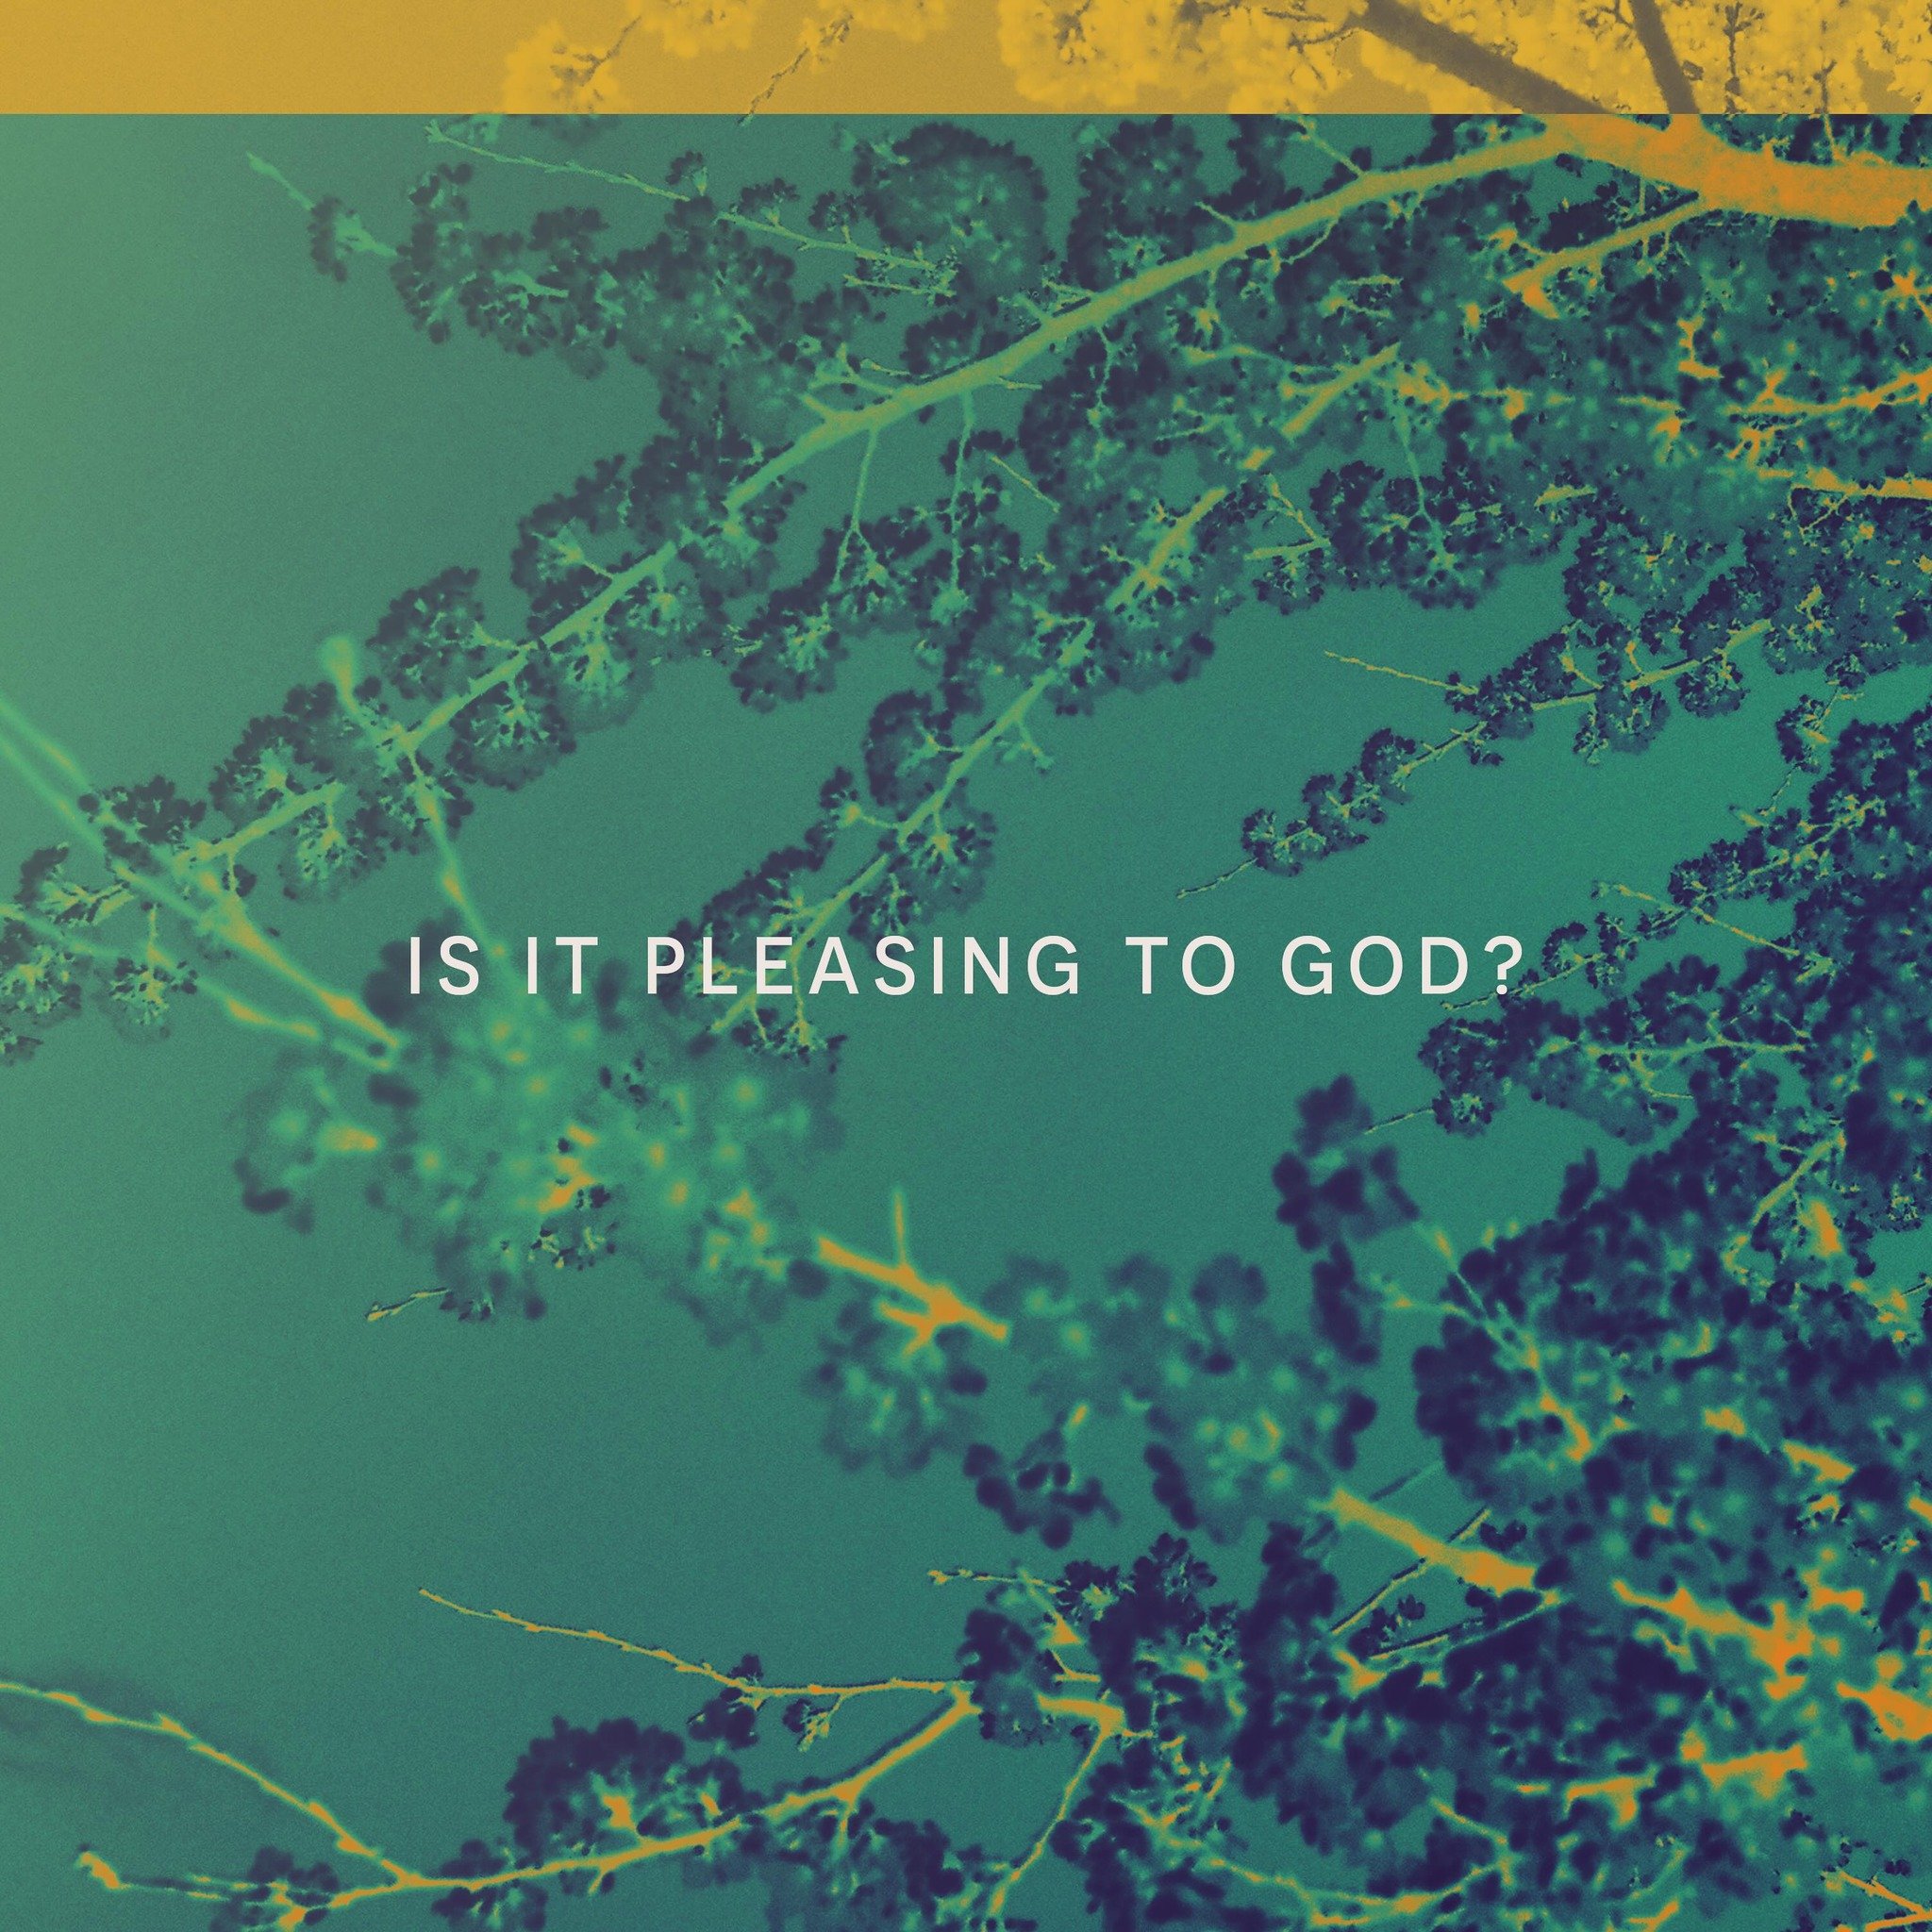 Let&rsquo;s simplify things. 

Before we make a choice, before we respond to someone or something and before we opt to act in a certain way, let&rsquo;s ask ourselves one question.

&ldquo;Is it pleasing to God?&rdquo;

This one question can shift ou